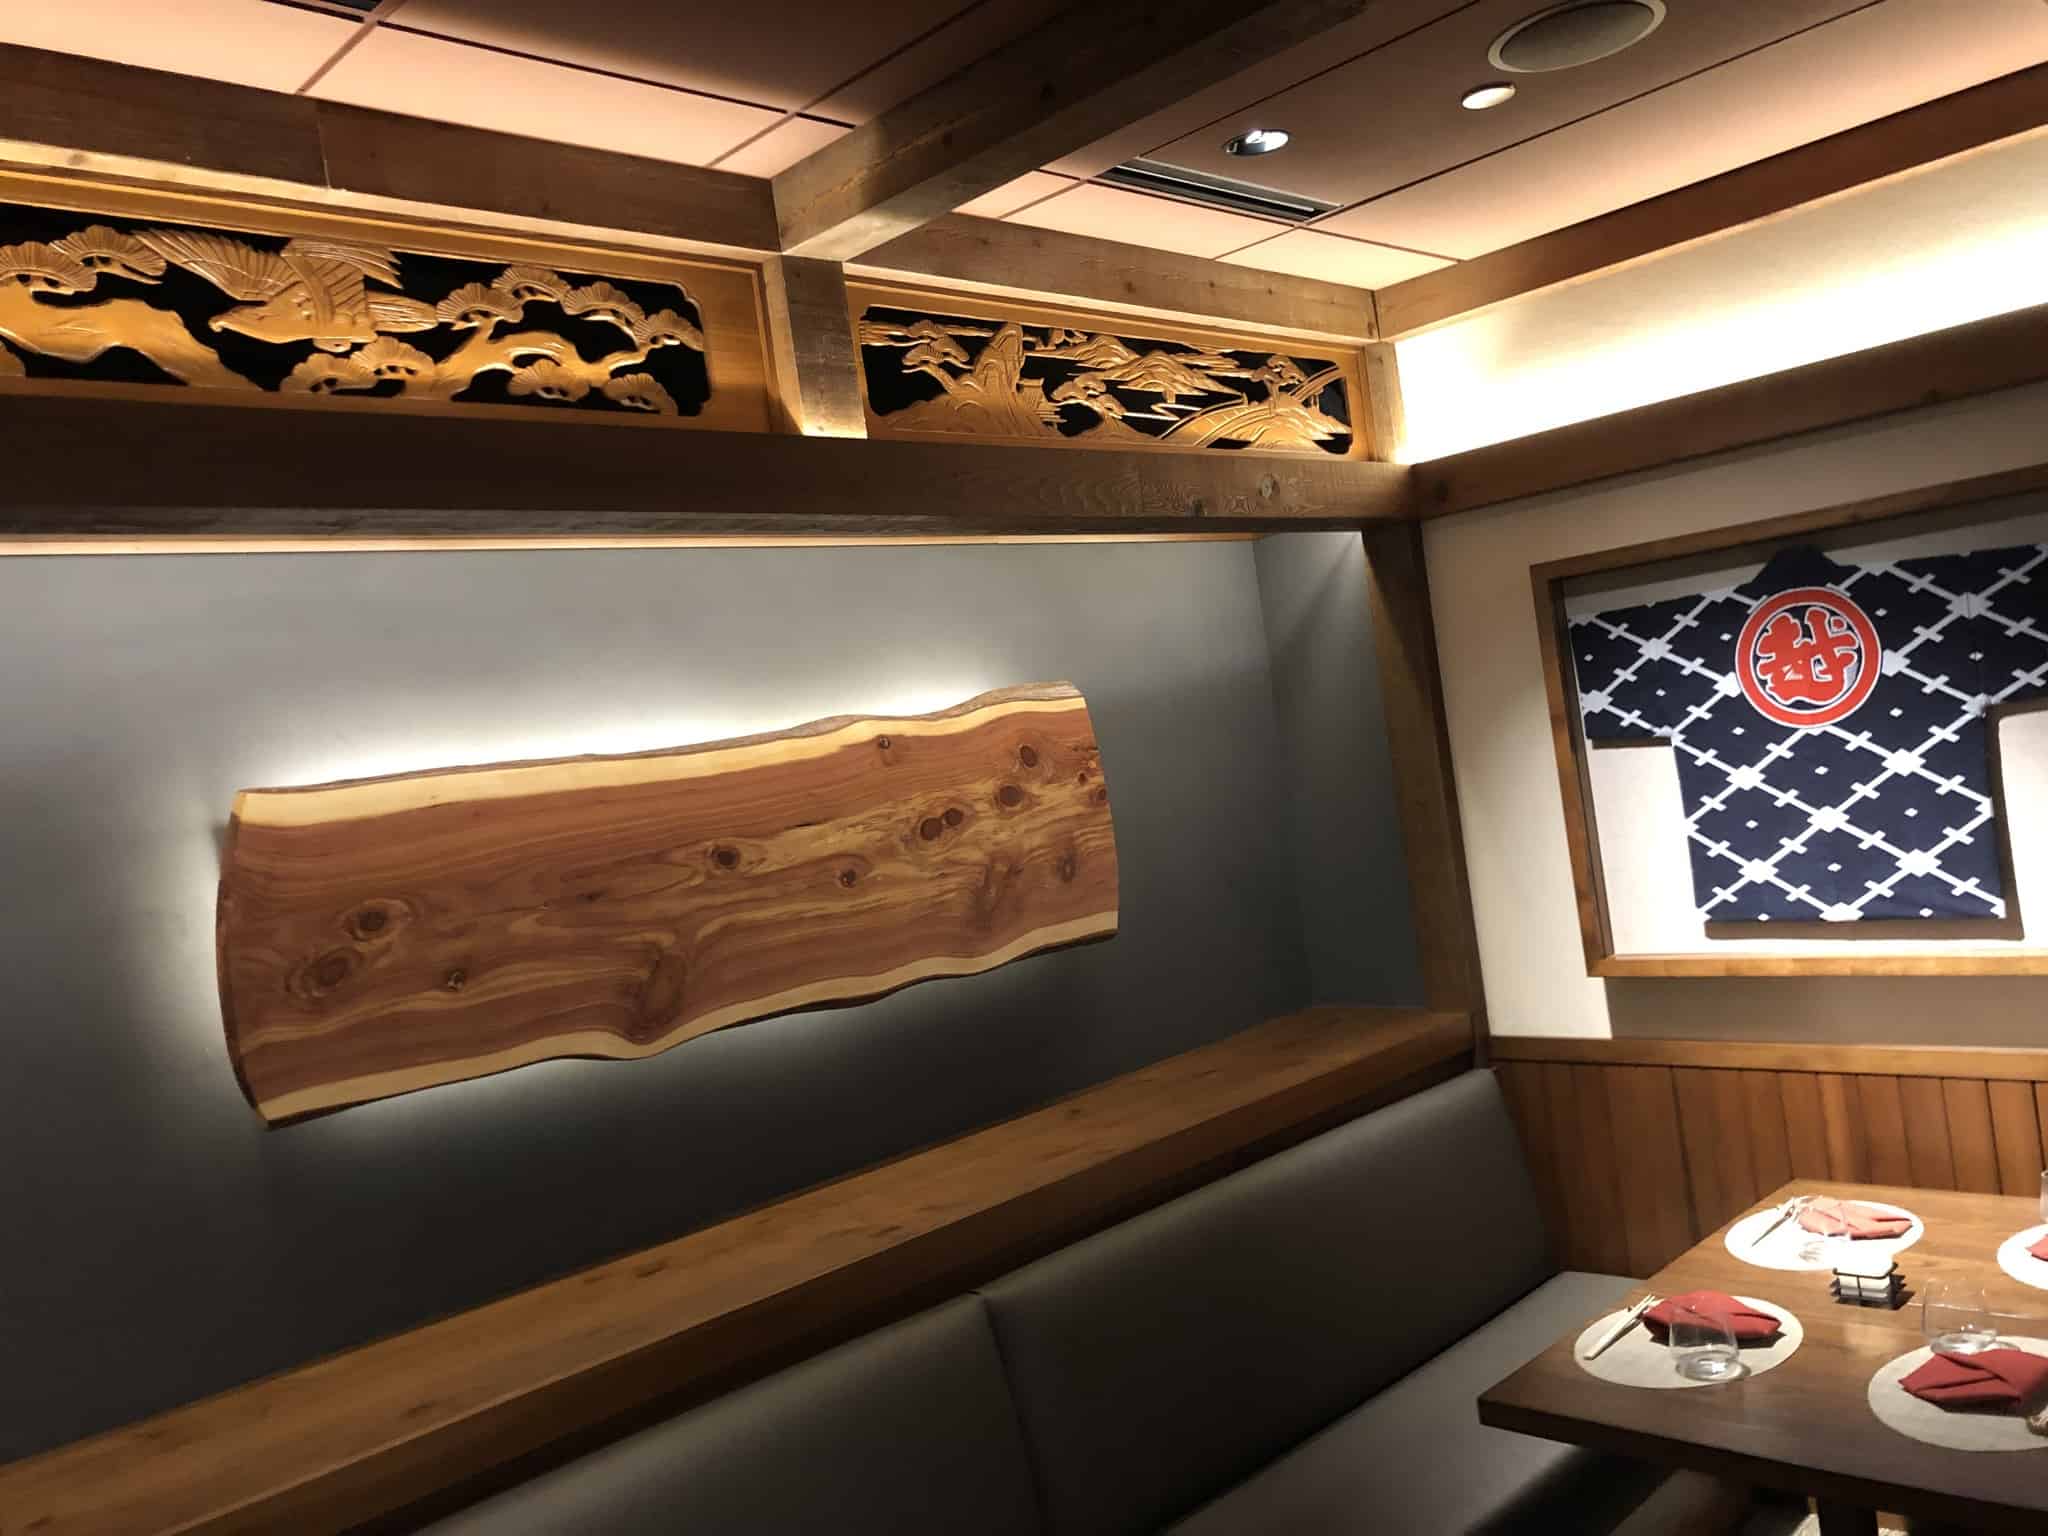 takumi tei opening day epcot japan pavilion review interior july 2019 6